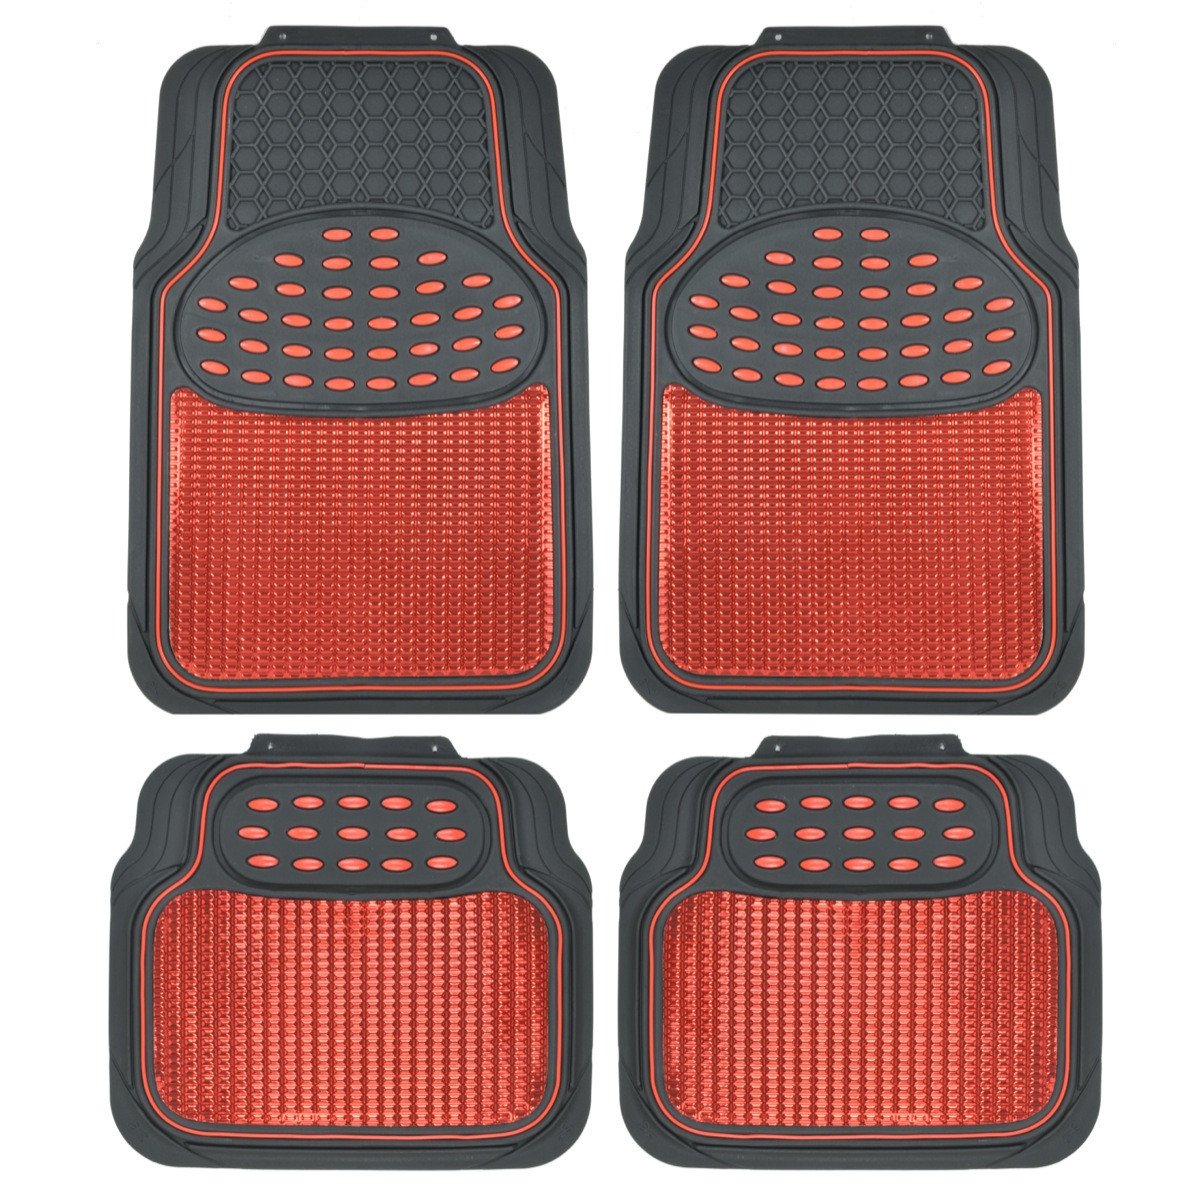 BDK Blue All Weather Heavy Duty Universal Fit Car Floor Mats Interior Liners for Auto Van Truck SUV, Heavy Duty All Weather Protection - Red:#FF0000